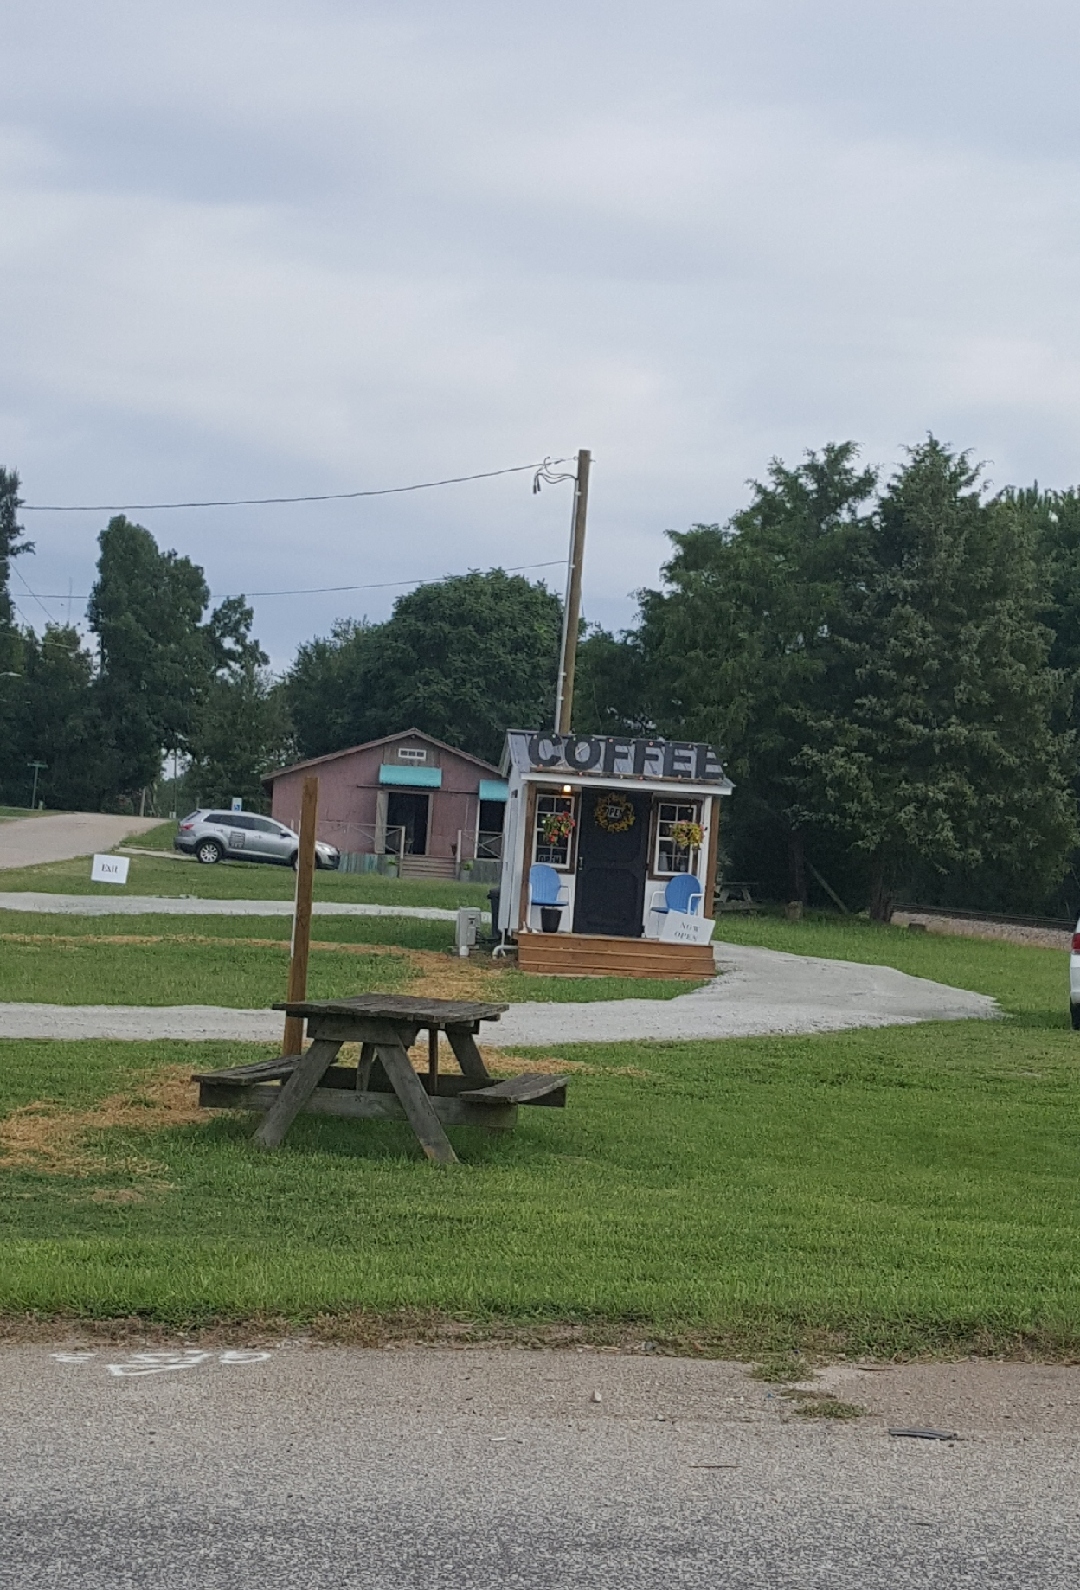 Check out this fun "coffee shack" in Youngsville, NC where local residents love to get their caffeine fix!